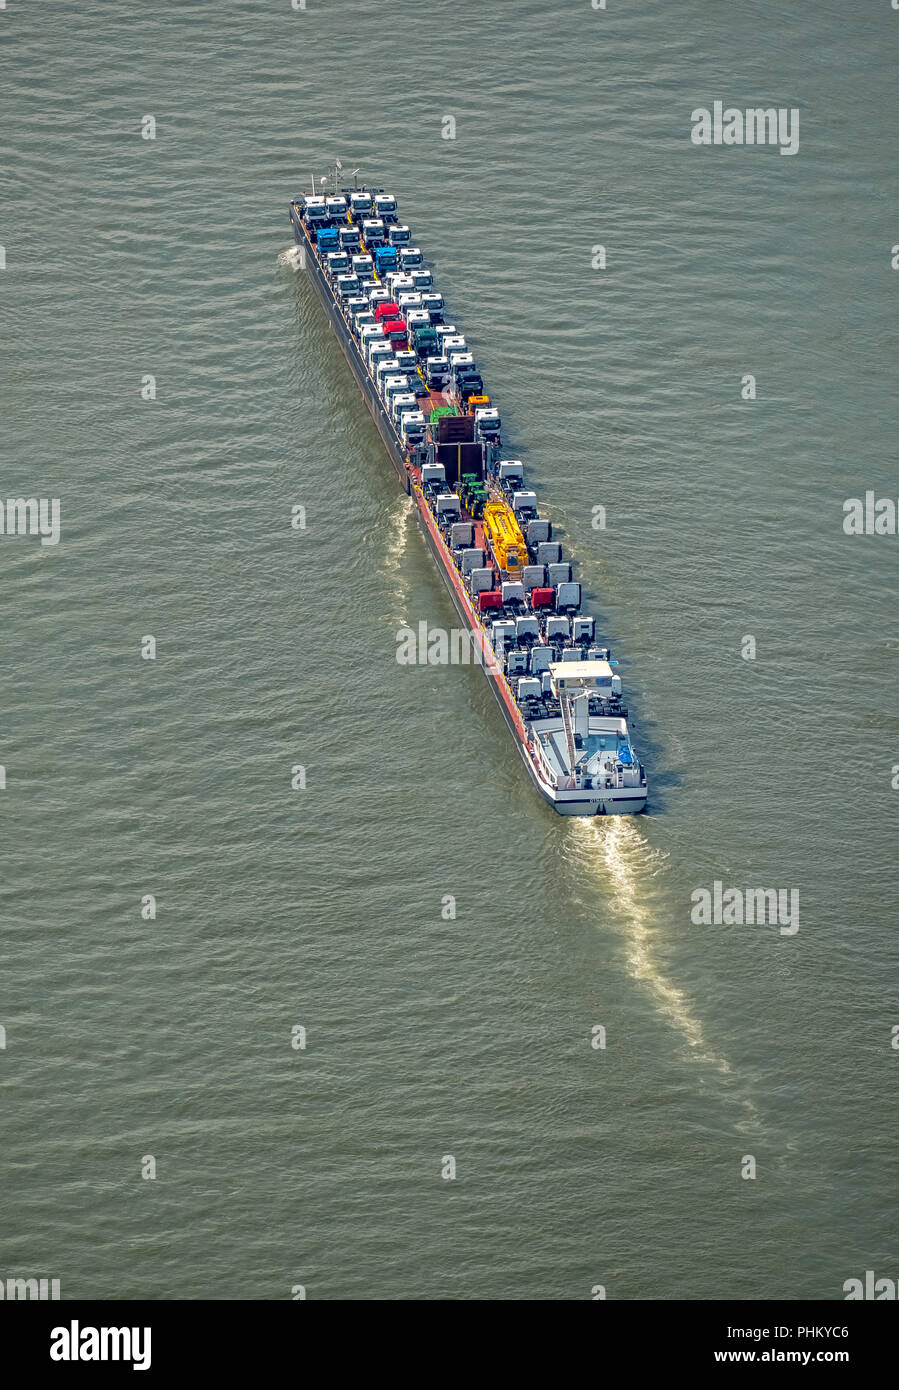 Aerial view, cargo ship on the Rhine goes uphill, push boat with additional lighters, tractors and trucks are the freight, inland navigation Duisburg, Stock Photo